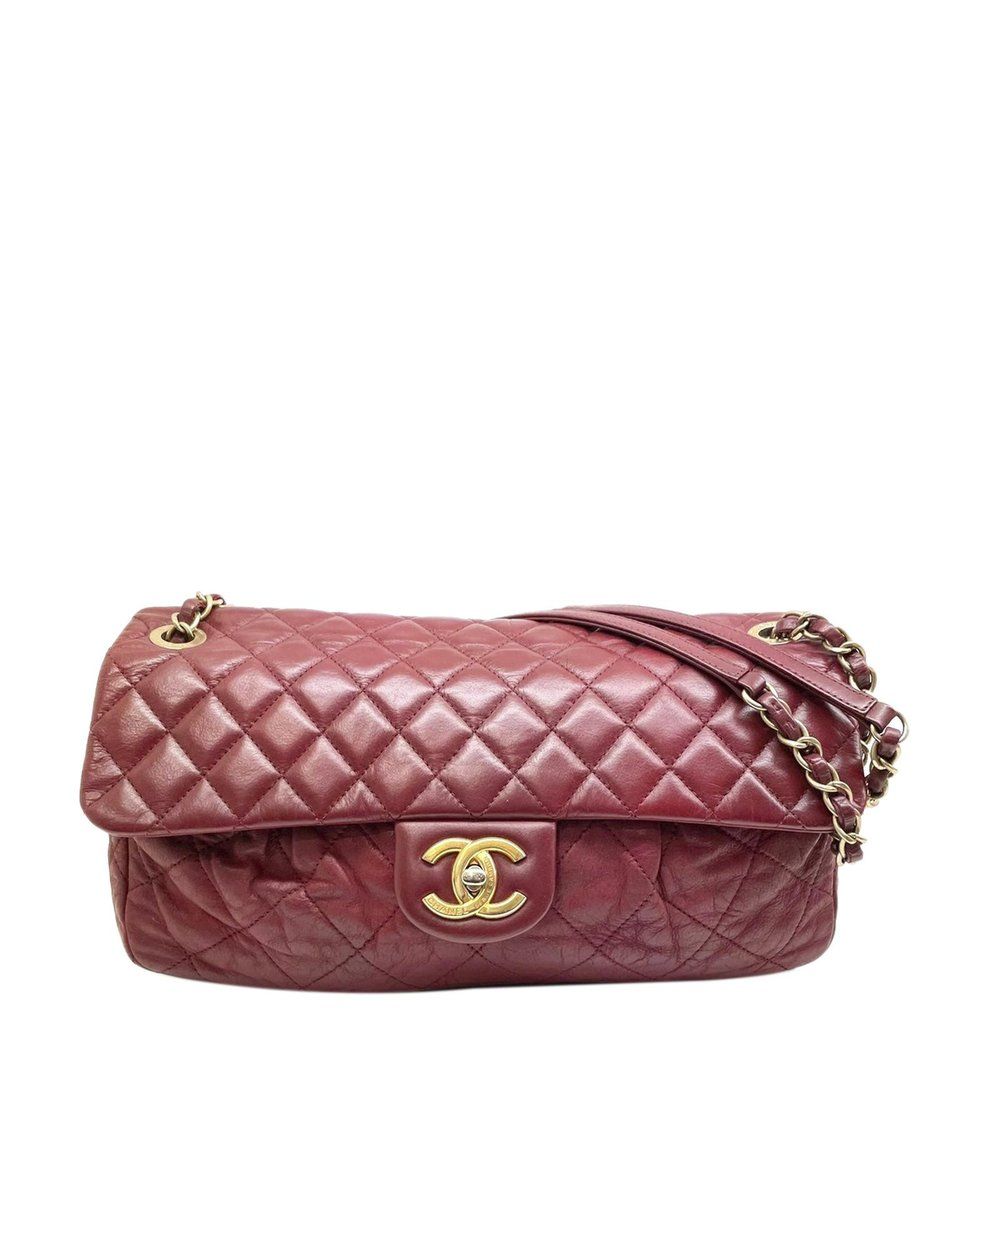 Pre-Loved Chanel Cc Timeless Lambskin Leather Single Flap Bag | THE ICONIC (AU & NZ)